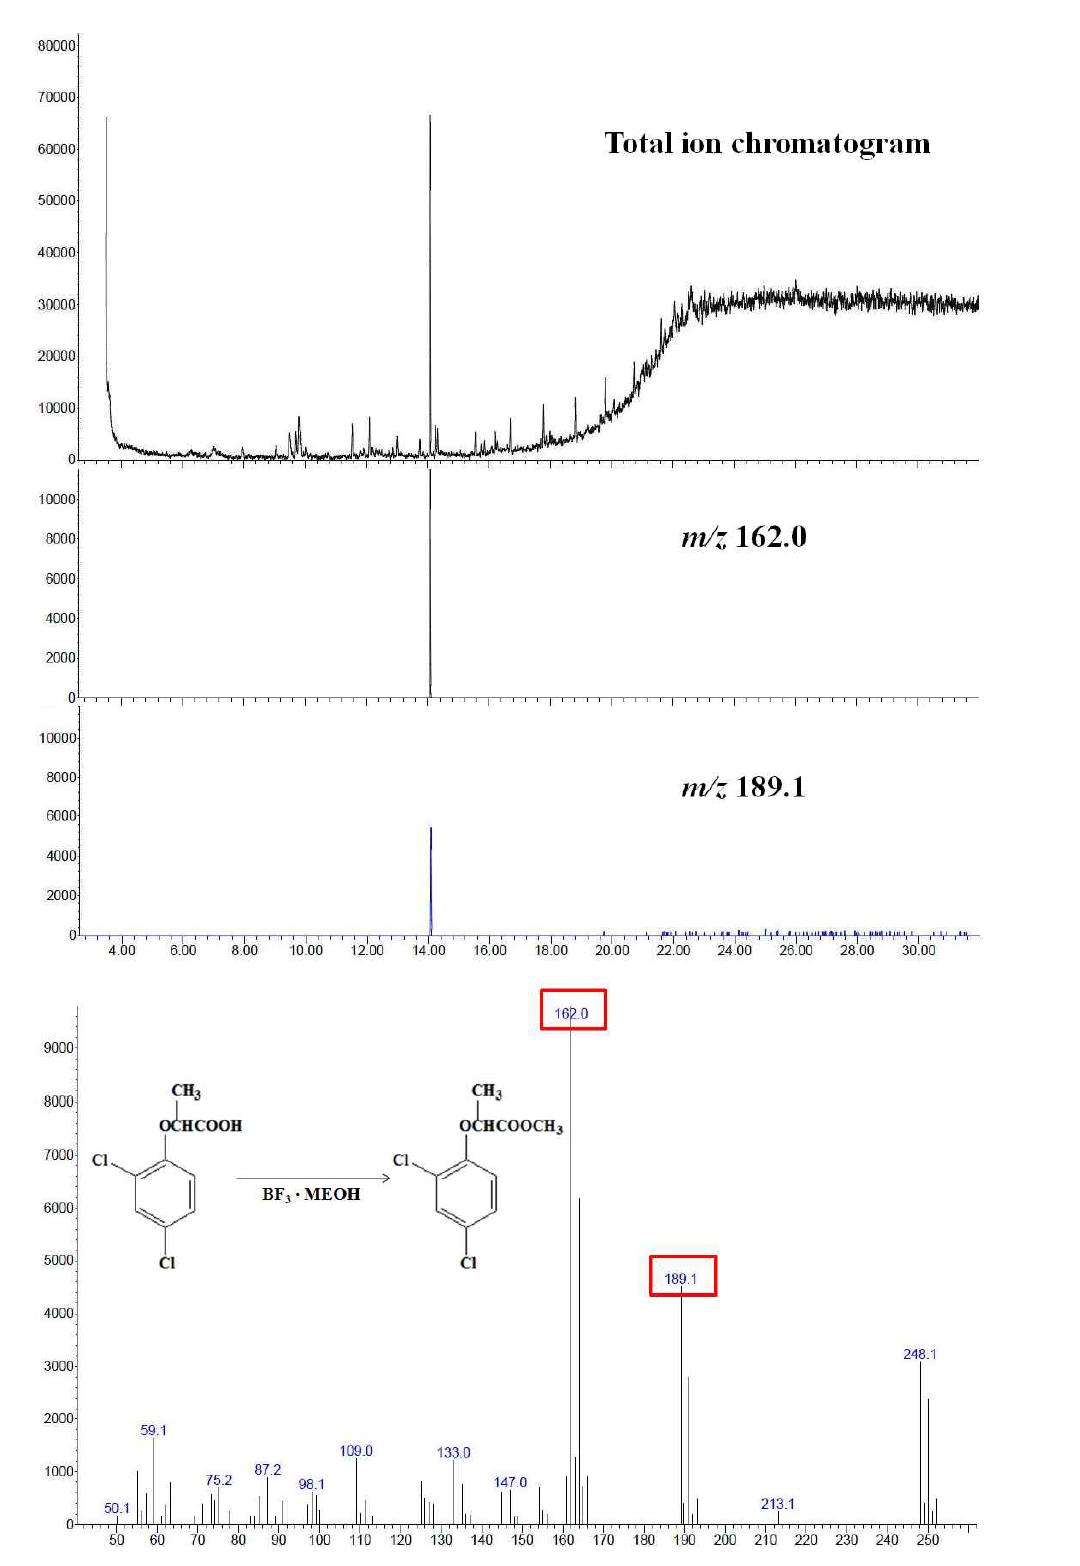 Total ion chromatogram and spectrum of dichorprop analyzed by GC/MSD (0.5 μg).